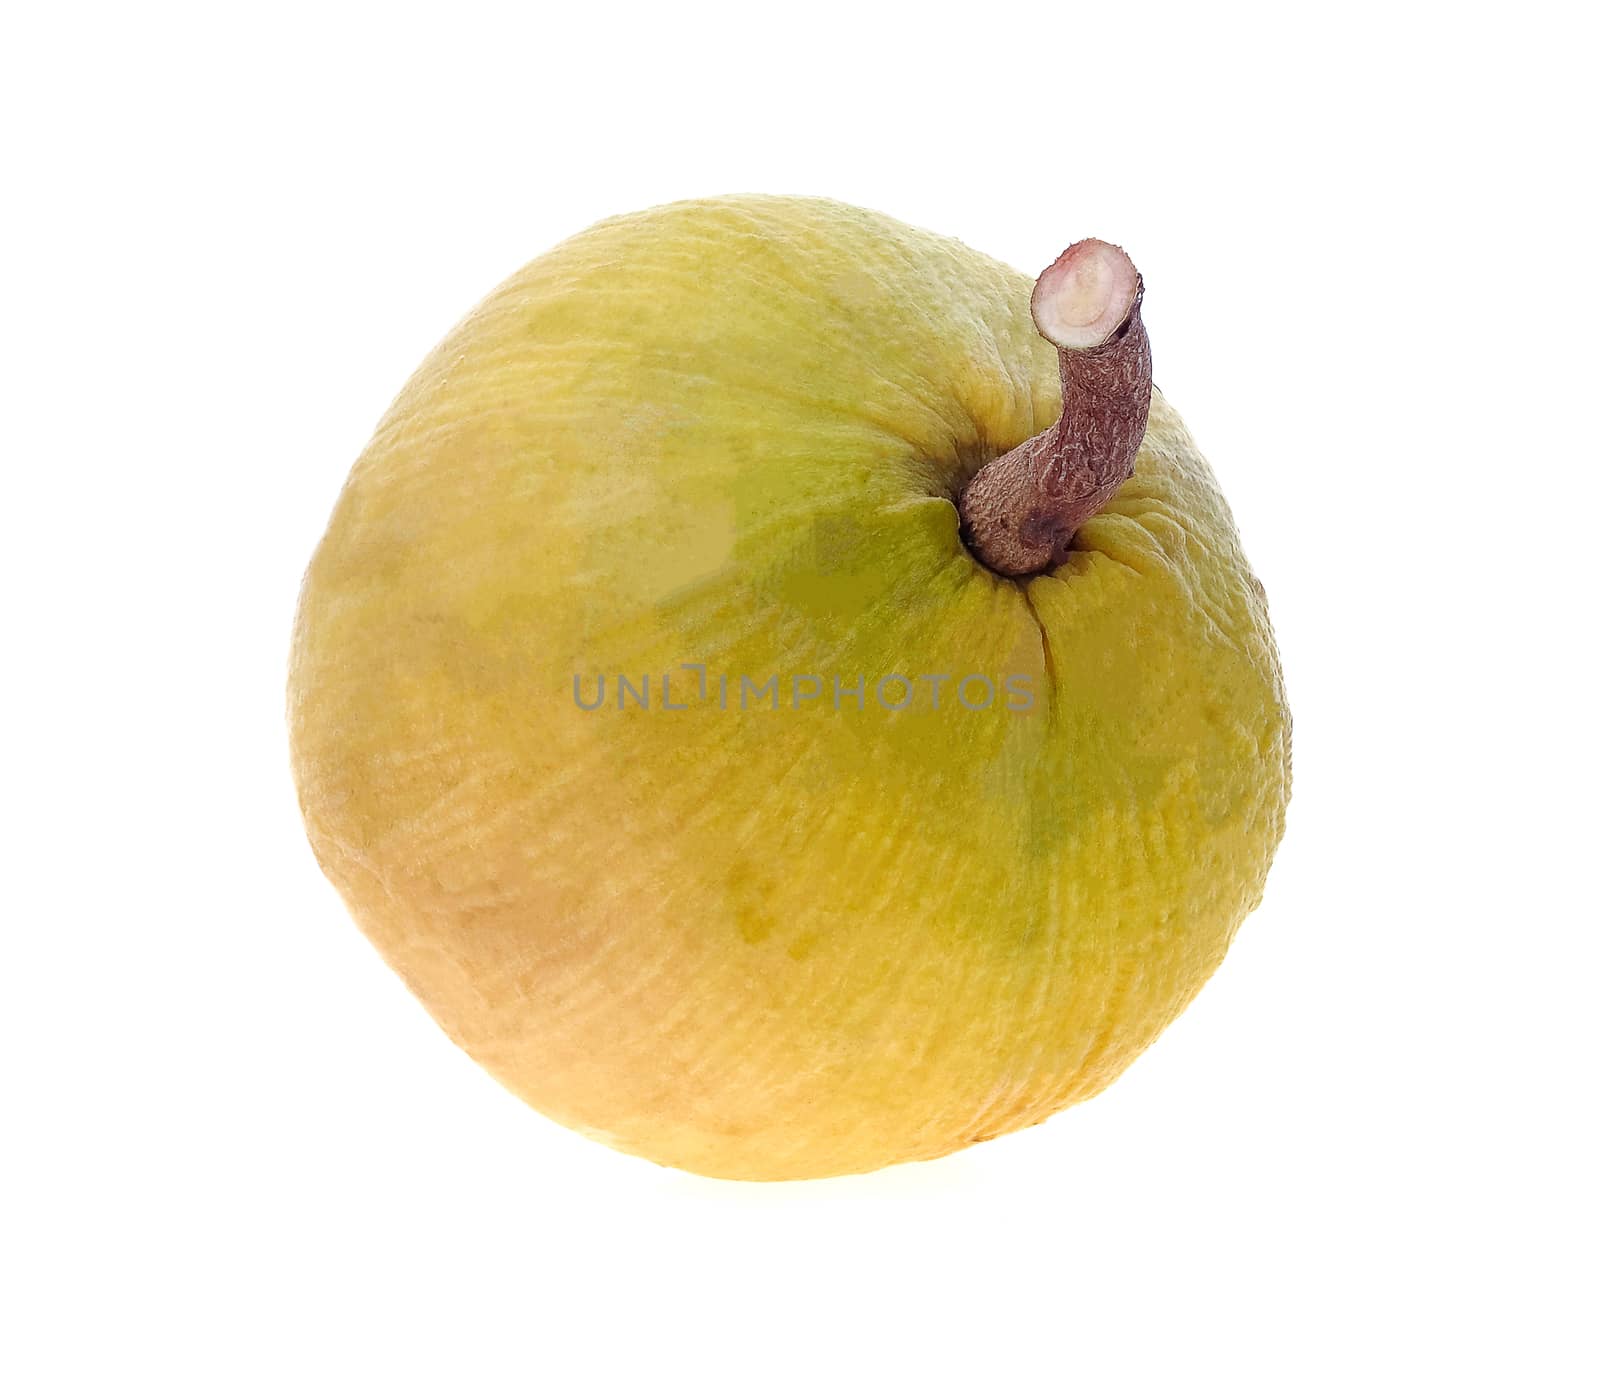 Santol fruit on white background. by poungsaed